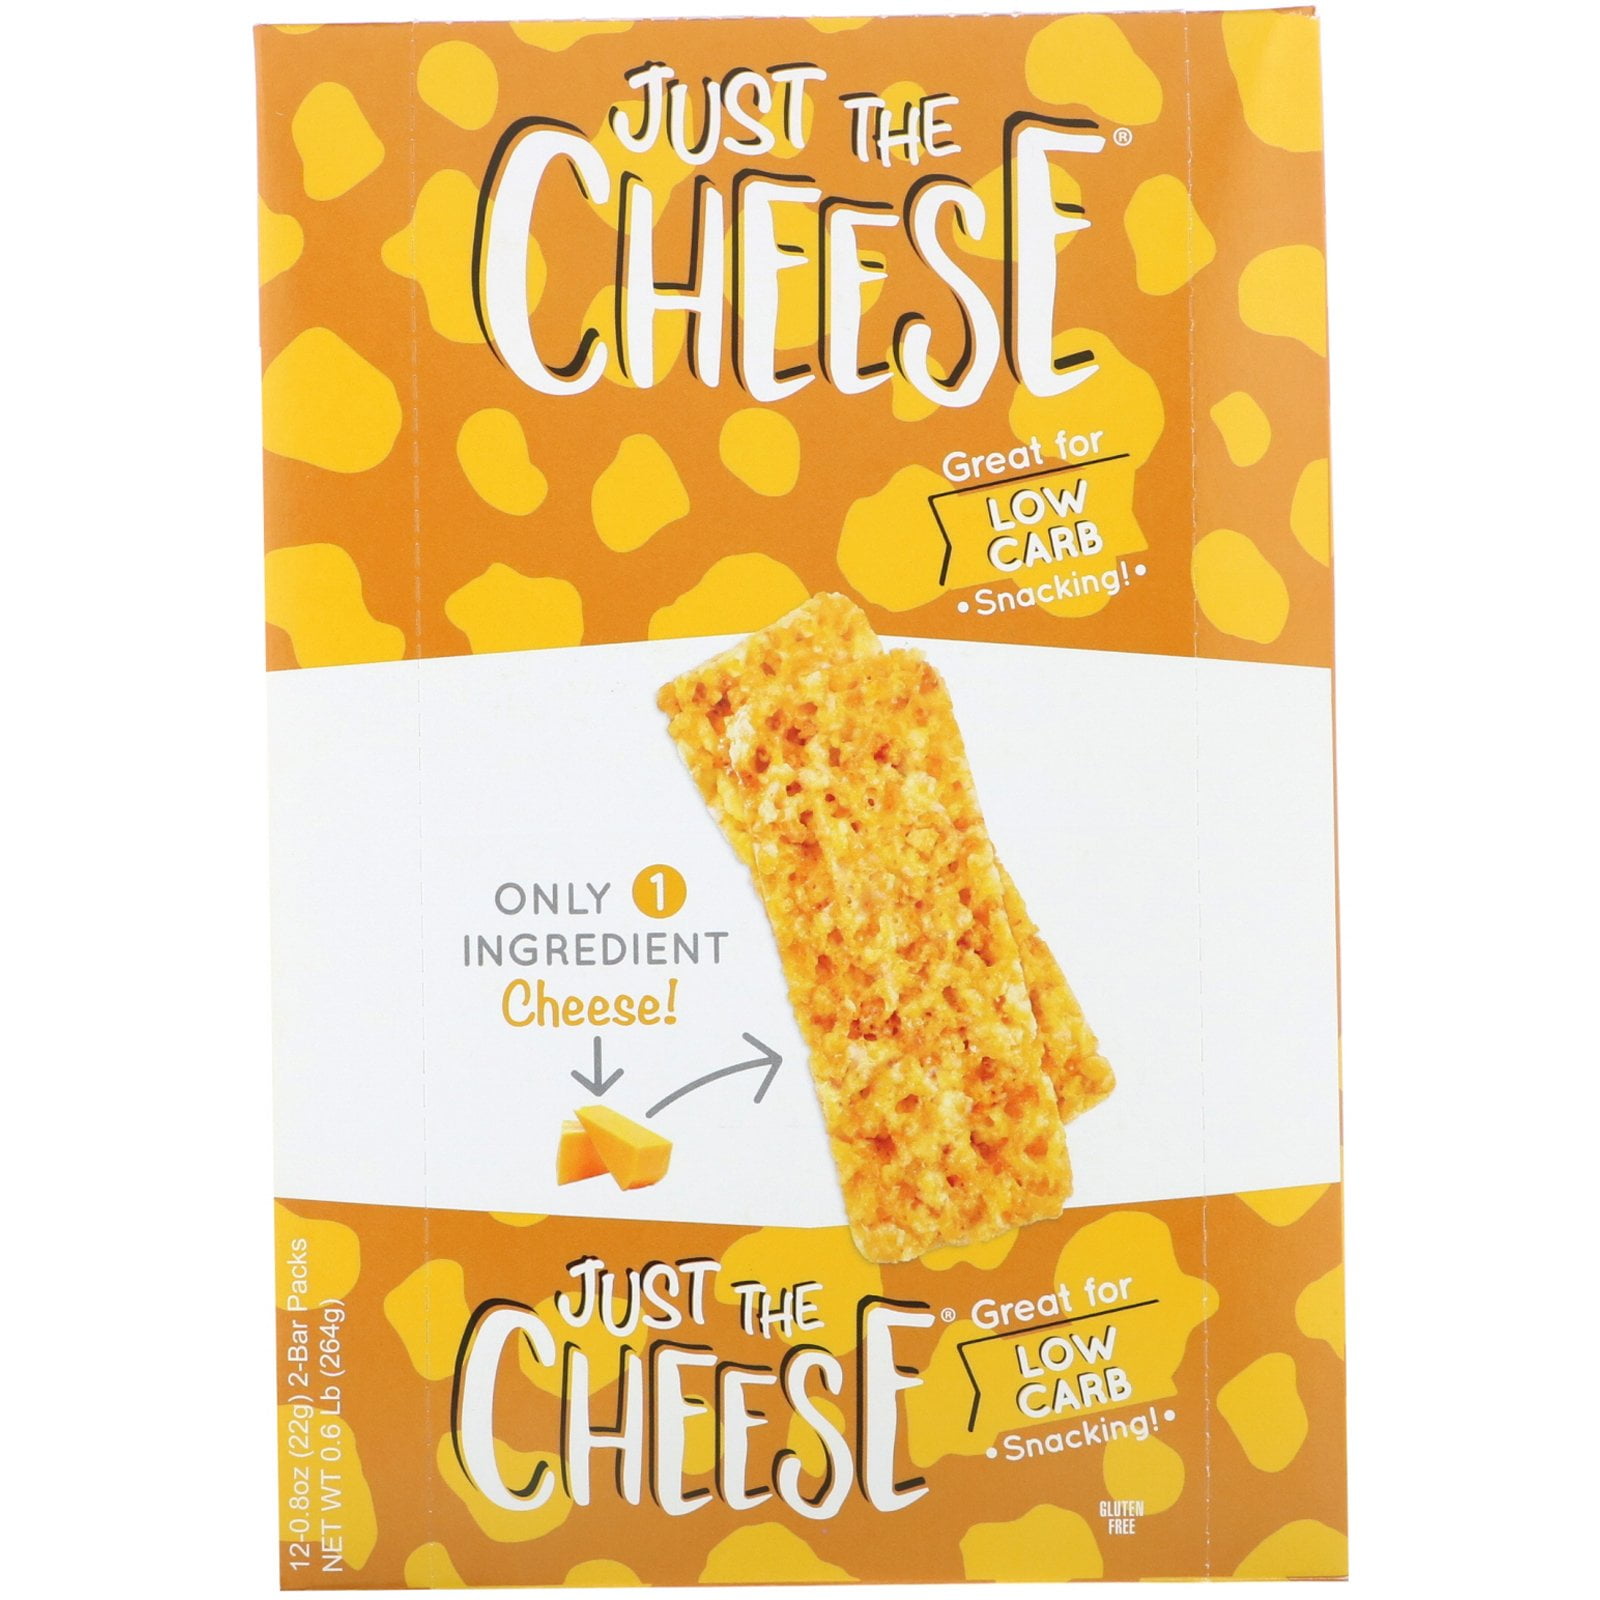 Page 1 - Reviews - Just The Cheese, Grilled Cheese Bars, 12 Bars, 0.8 oz  (22 g) - iHerb